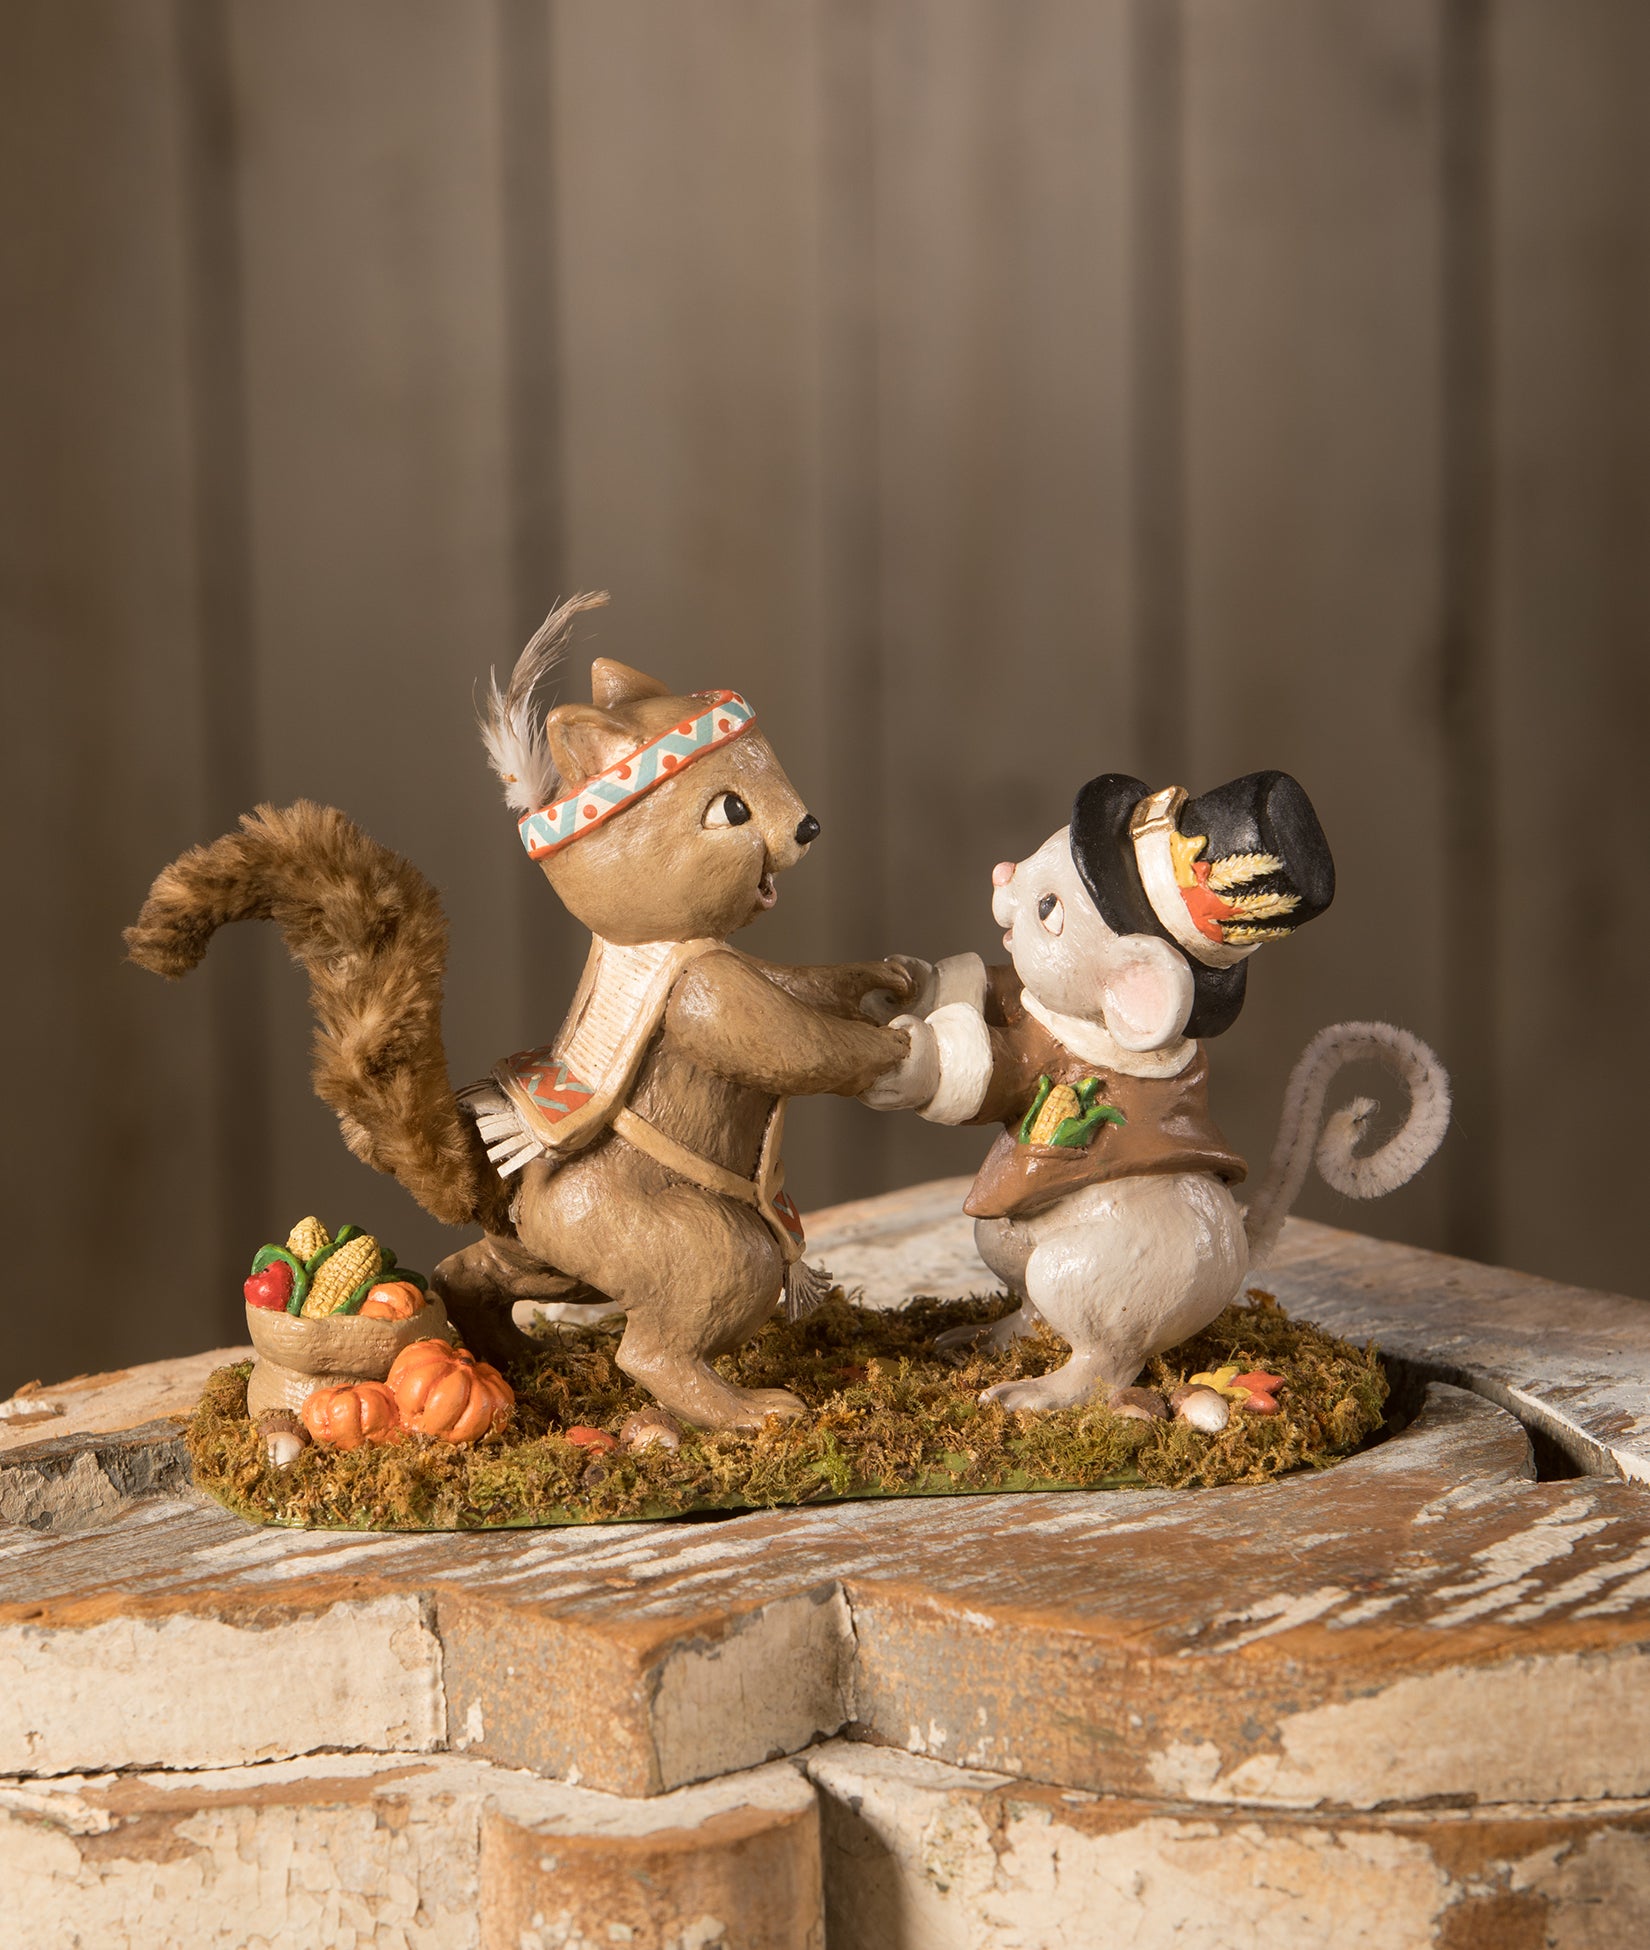 A Thankful Celebration Squirrel & Mouse Dressed Up as Pilgrim & Native American celebrate Thanksgiving Figurine